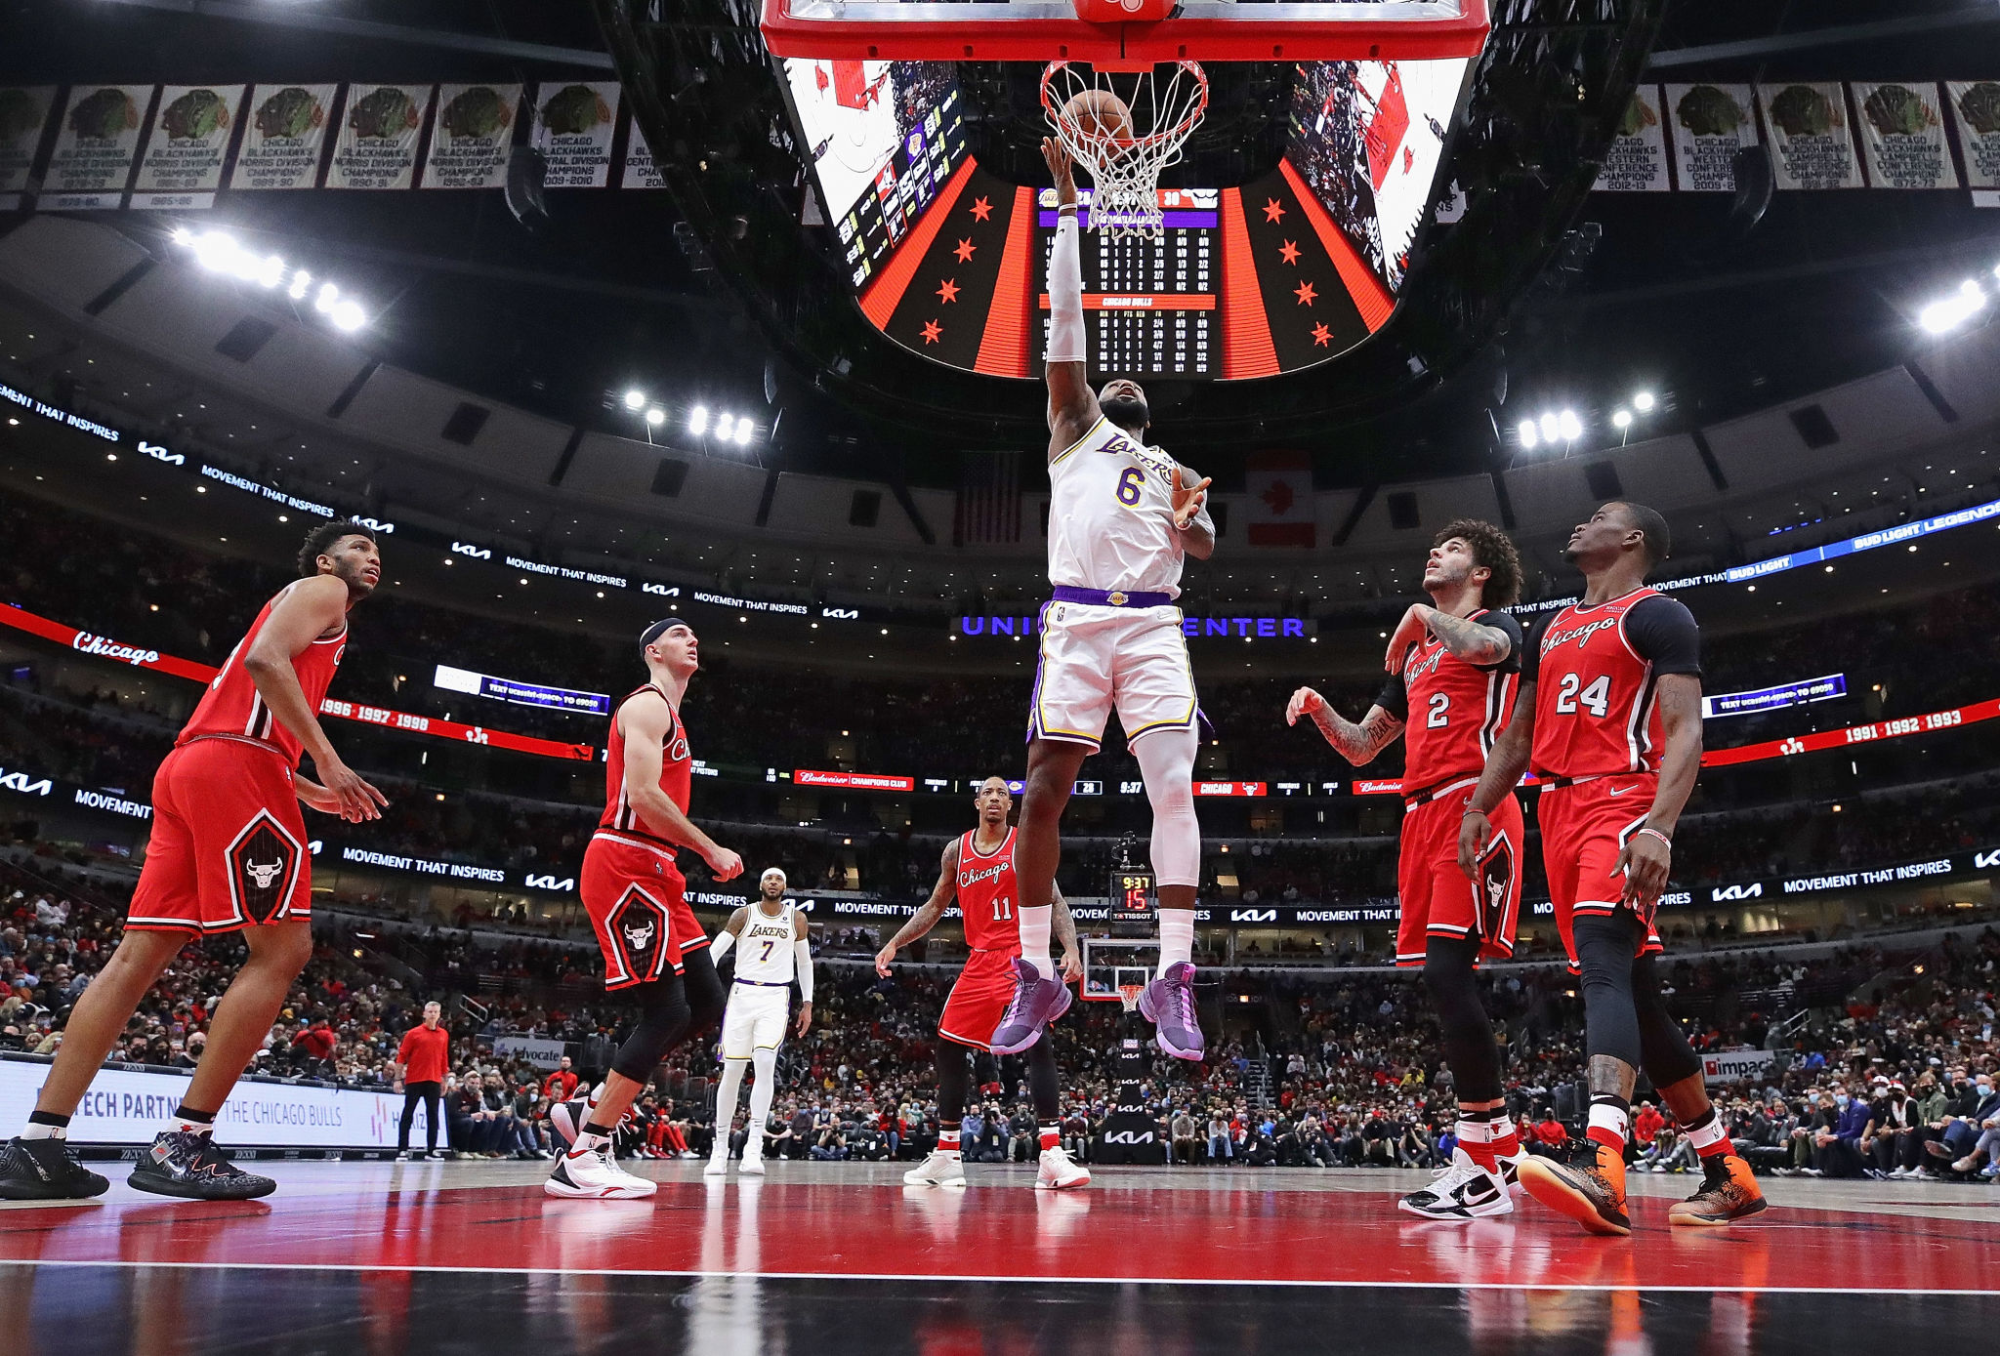 Lakers star LeBron James scores against the Chicago Bulls.